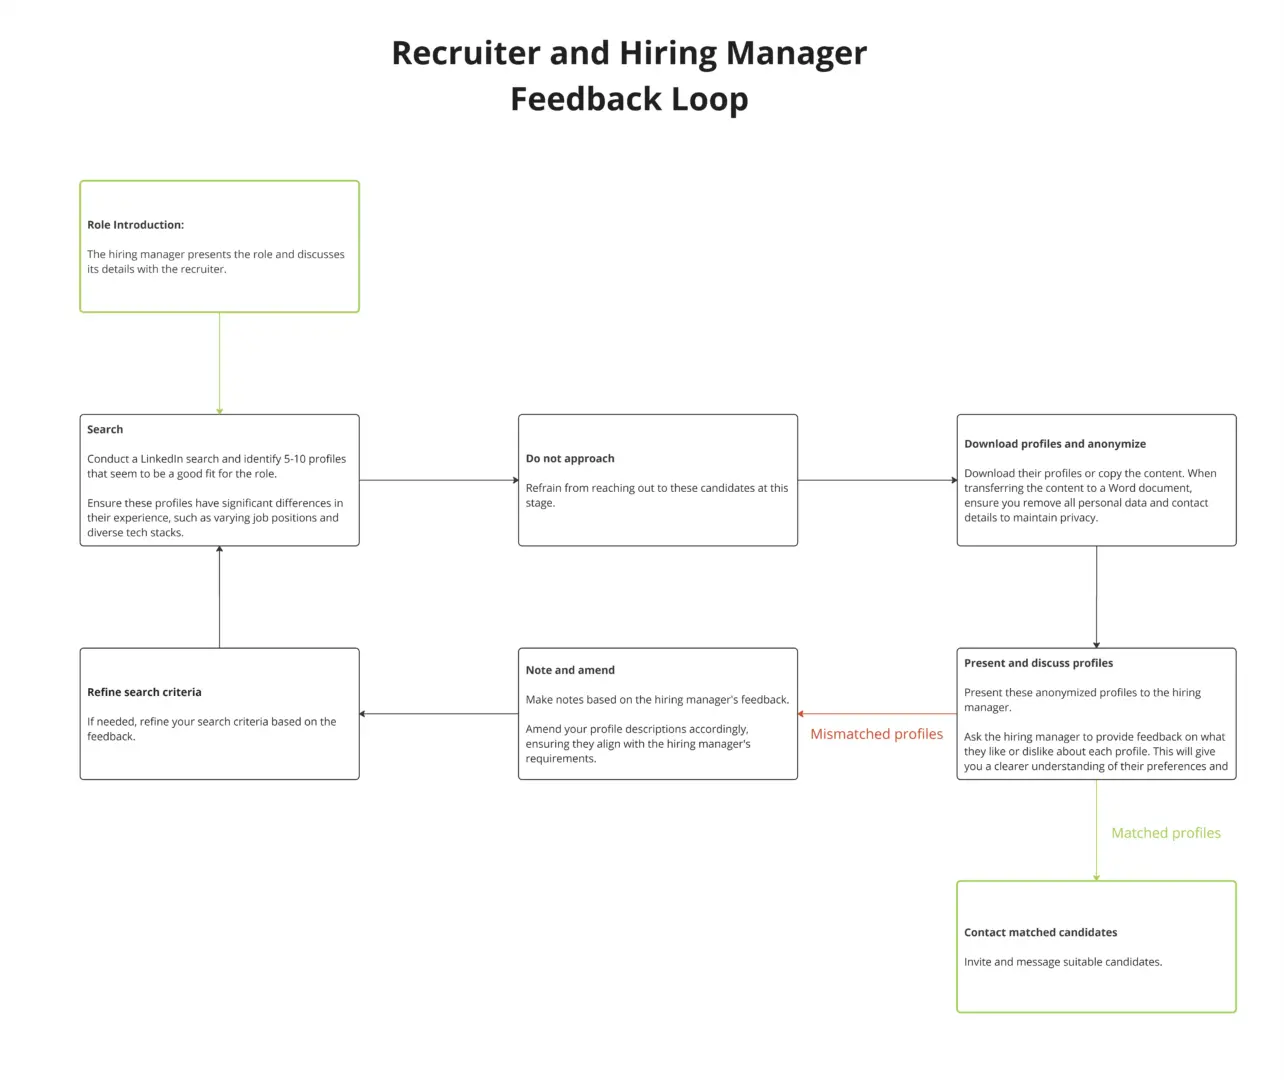 Recruiter and Hiring Manager Feedback Loop